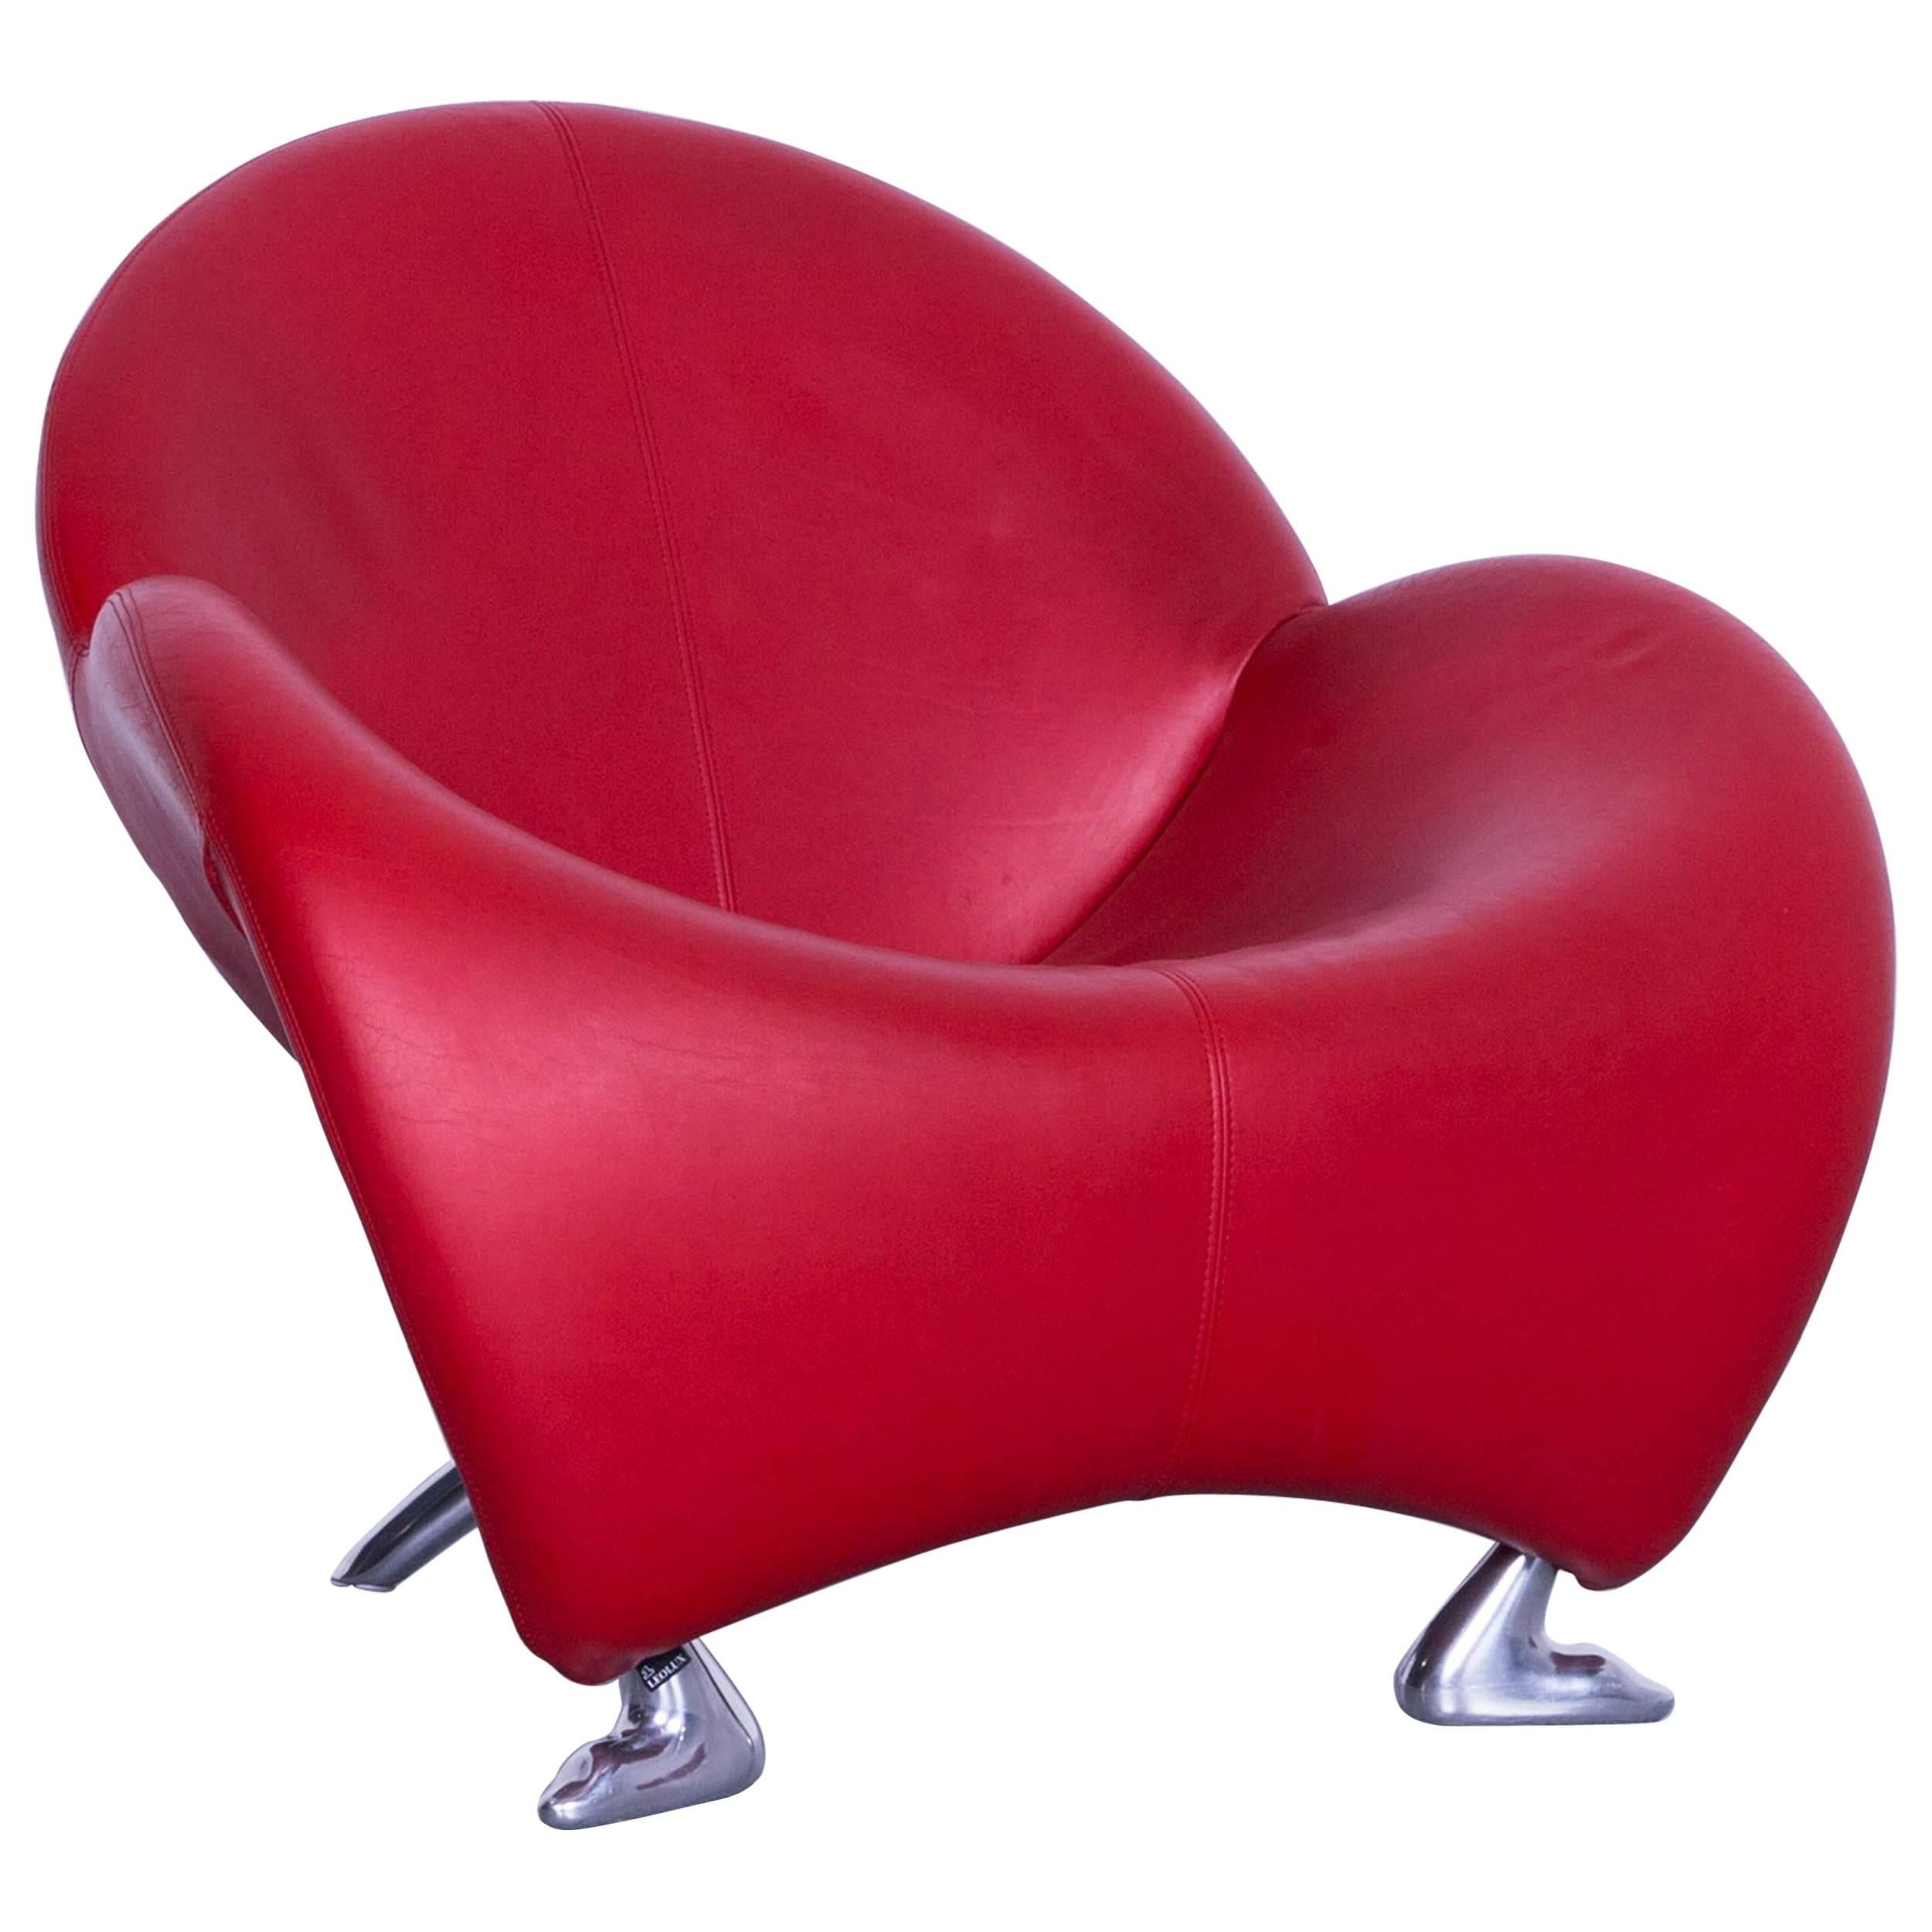 Leolux Papageno Designer Leather Chair Red One-Seat Lounge Modern